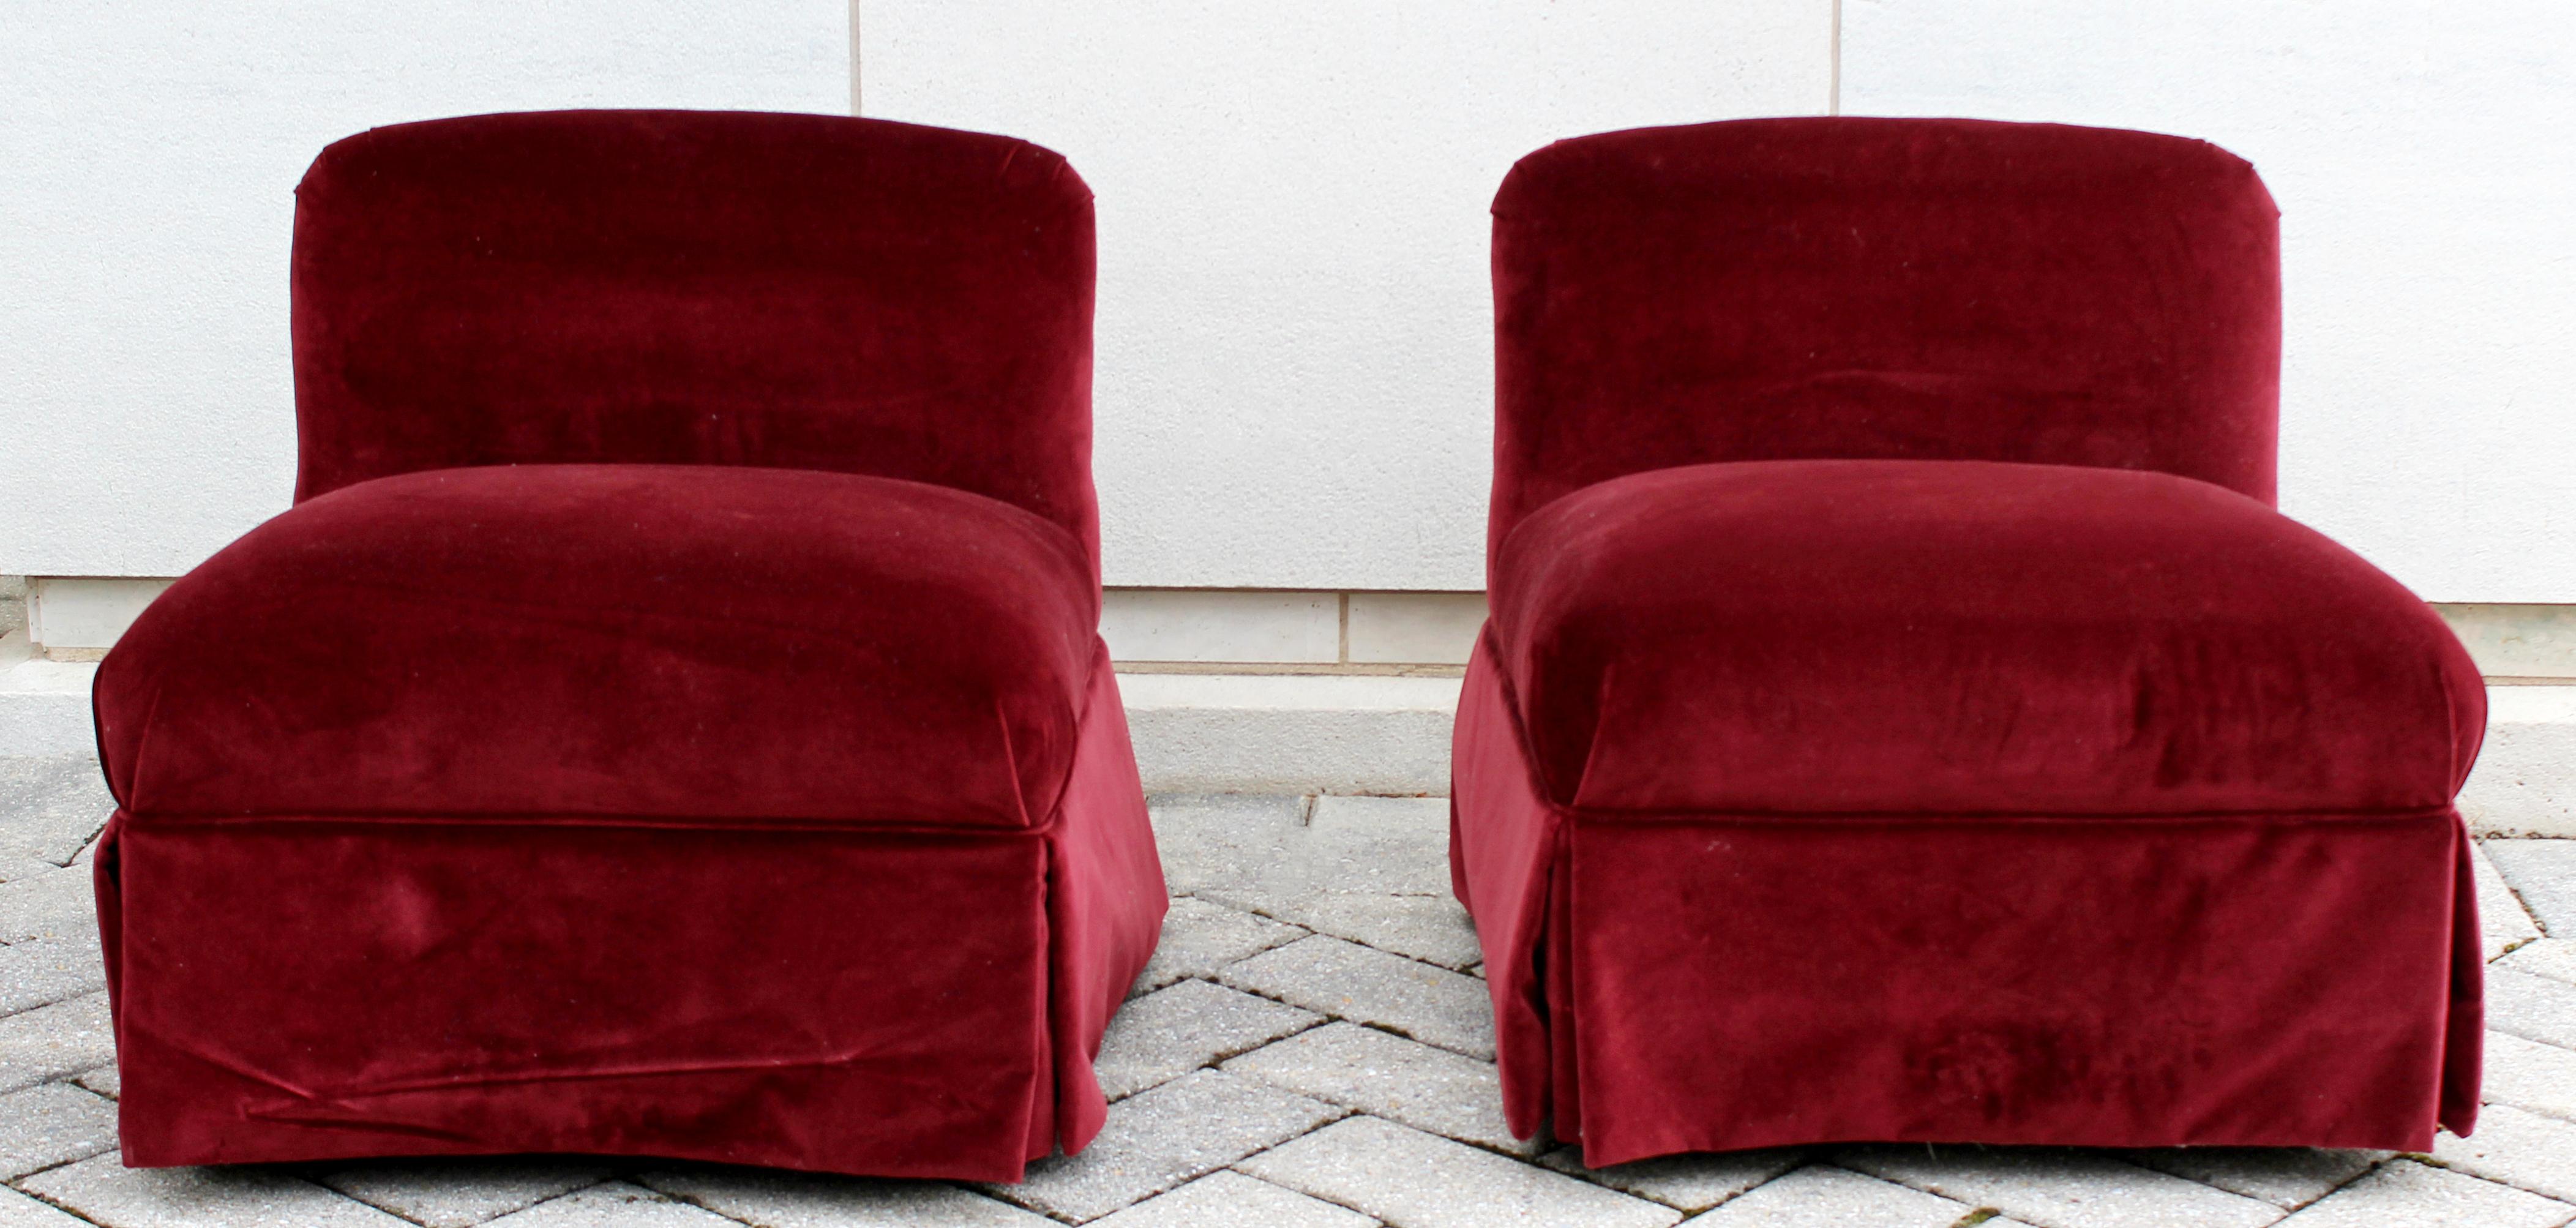 For your consideration is a stunning pair of magenta velvet slipper chairs, by Pearson. In excellent condition. The dimensions are 26